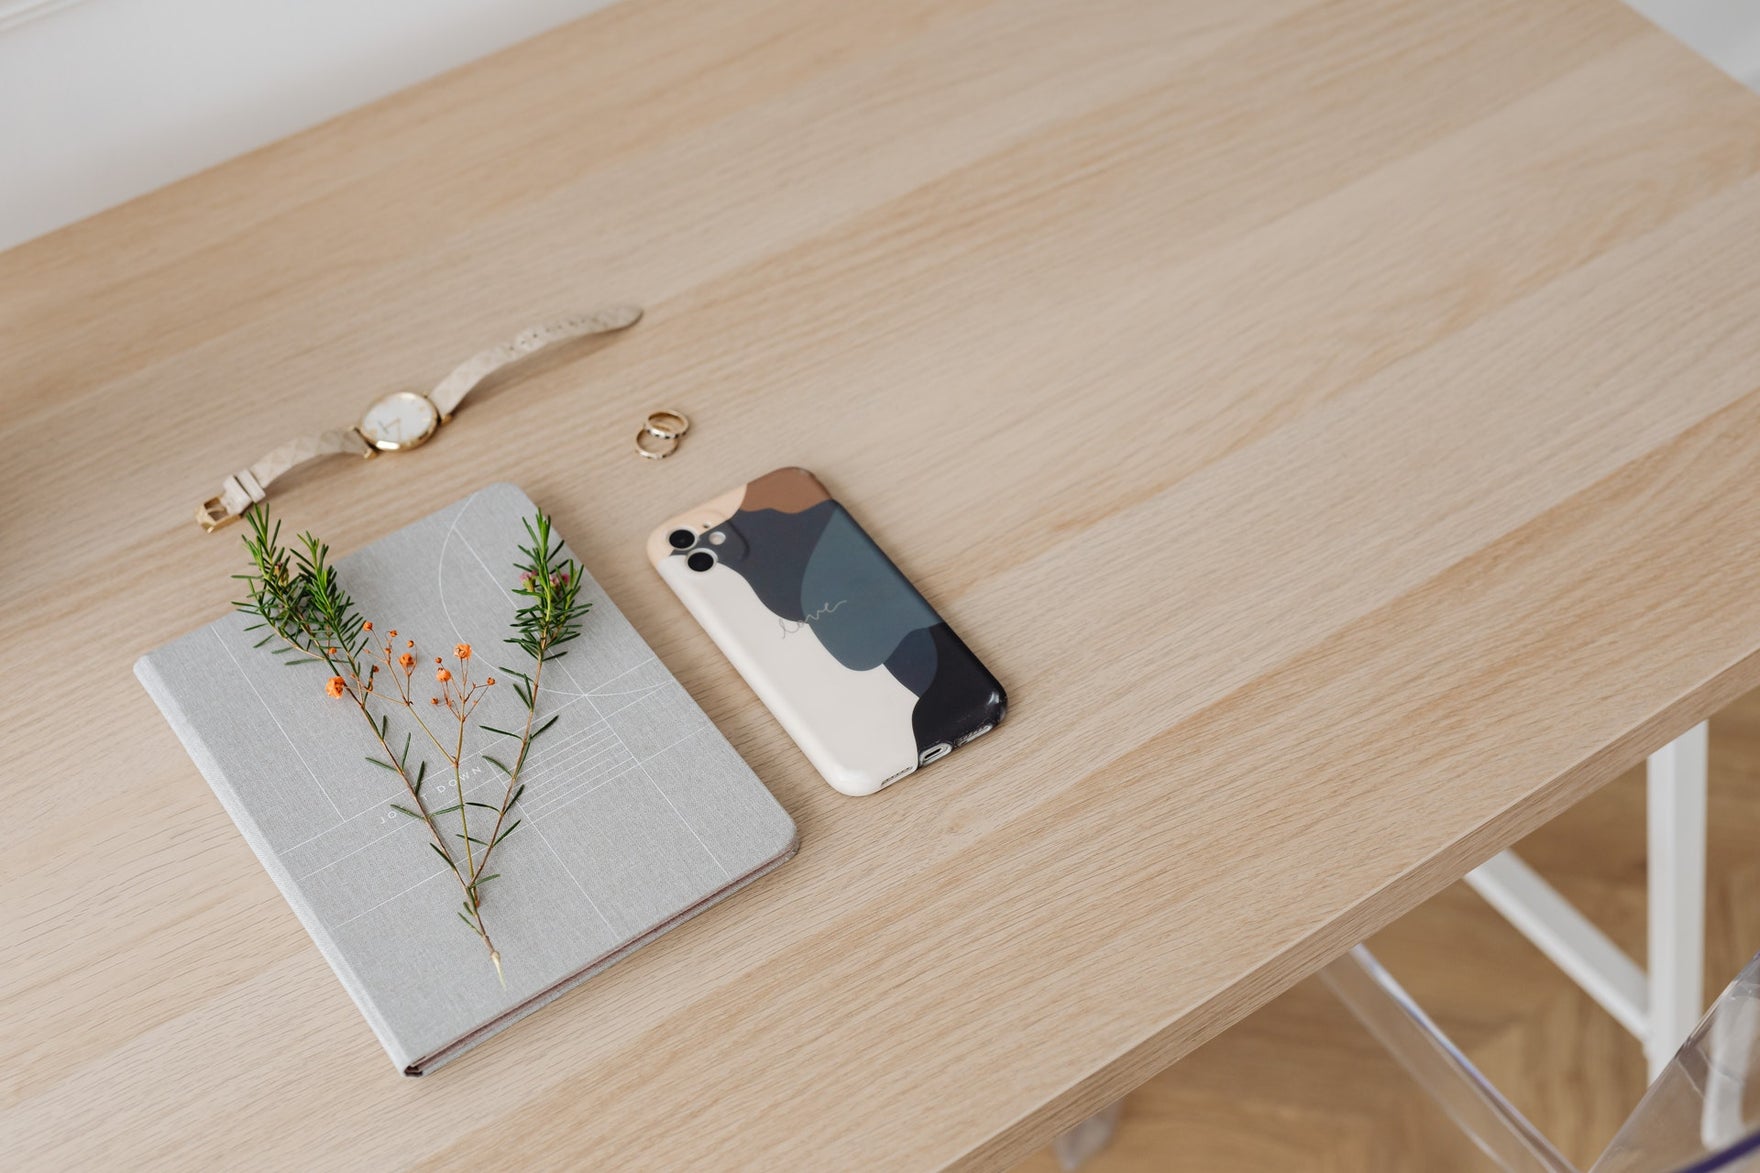 A grey notebook with sprigs of greenery on a light wooden desk, next to a watch and a phone